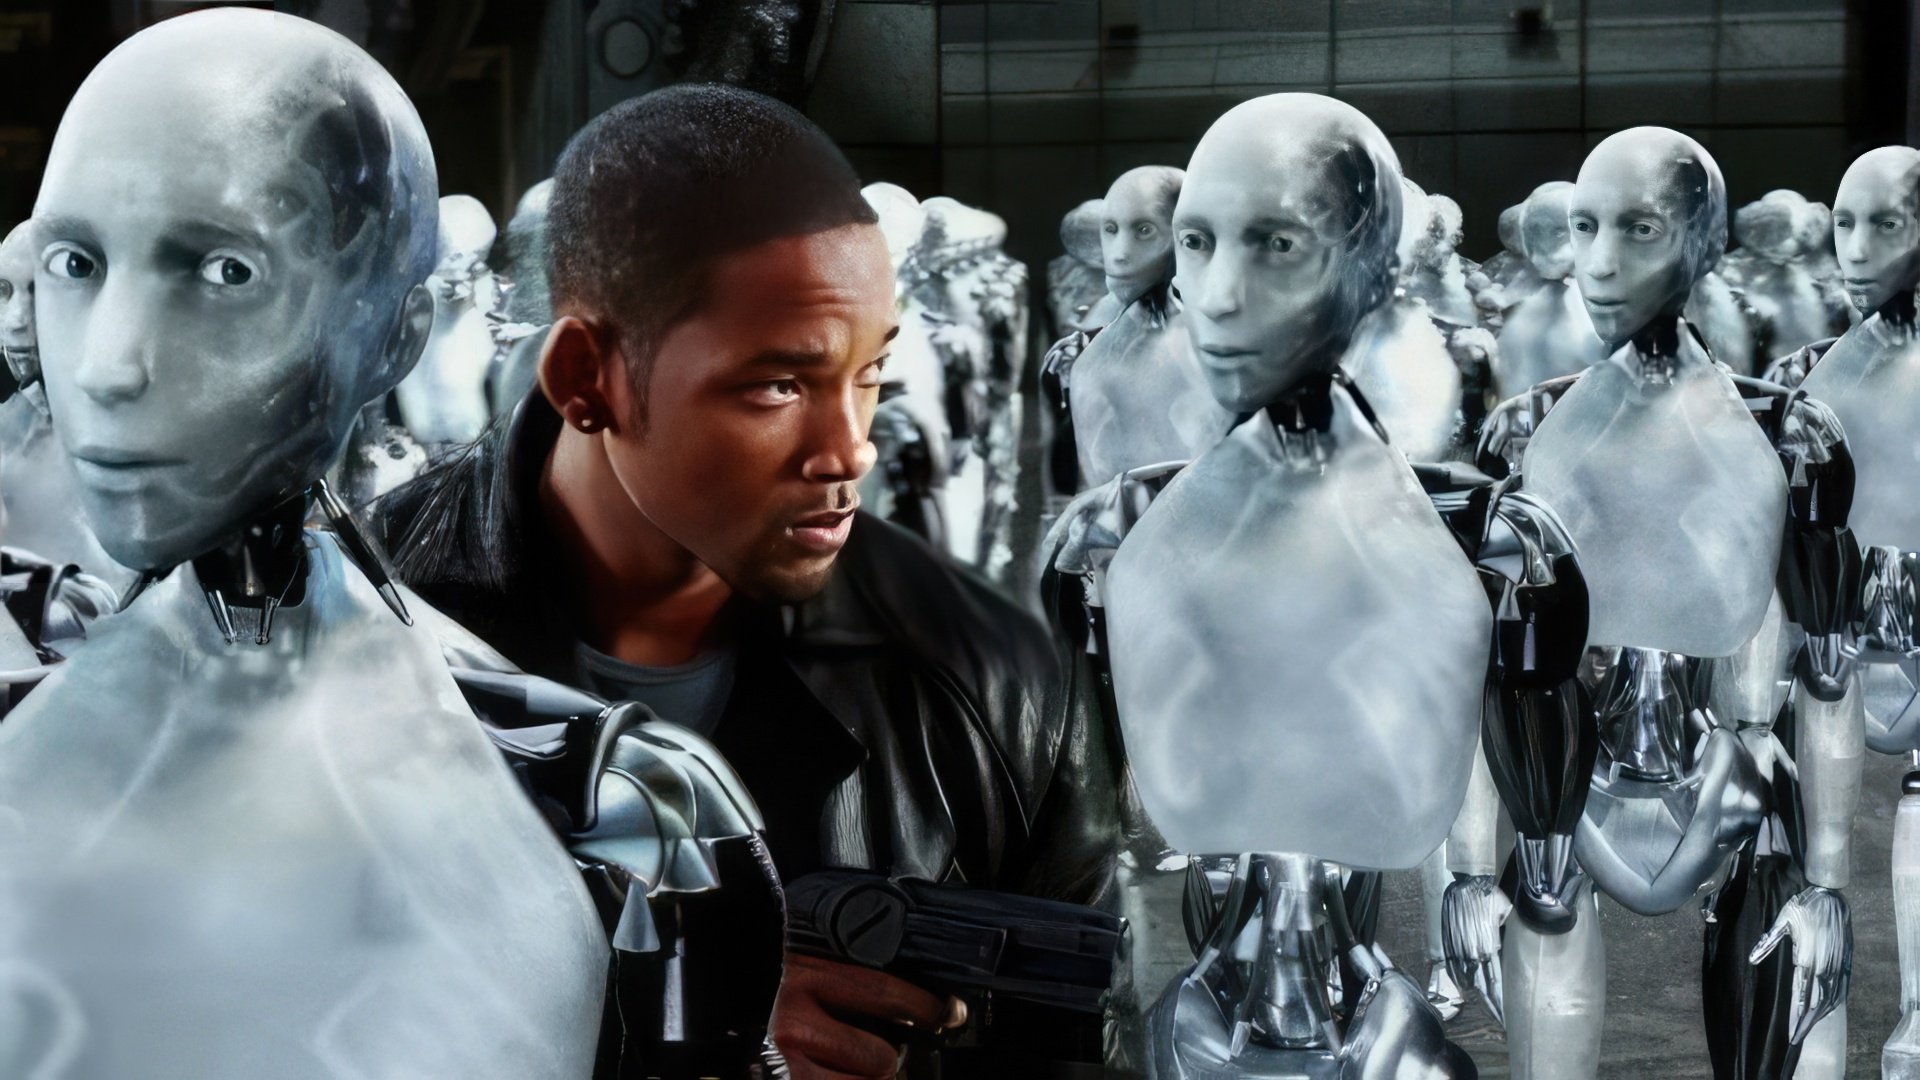 »I, Robot» – one of the most serious movie roles in Smith’s career